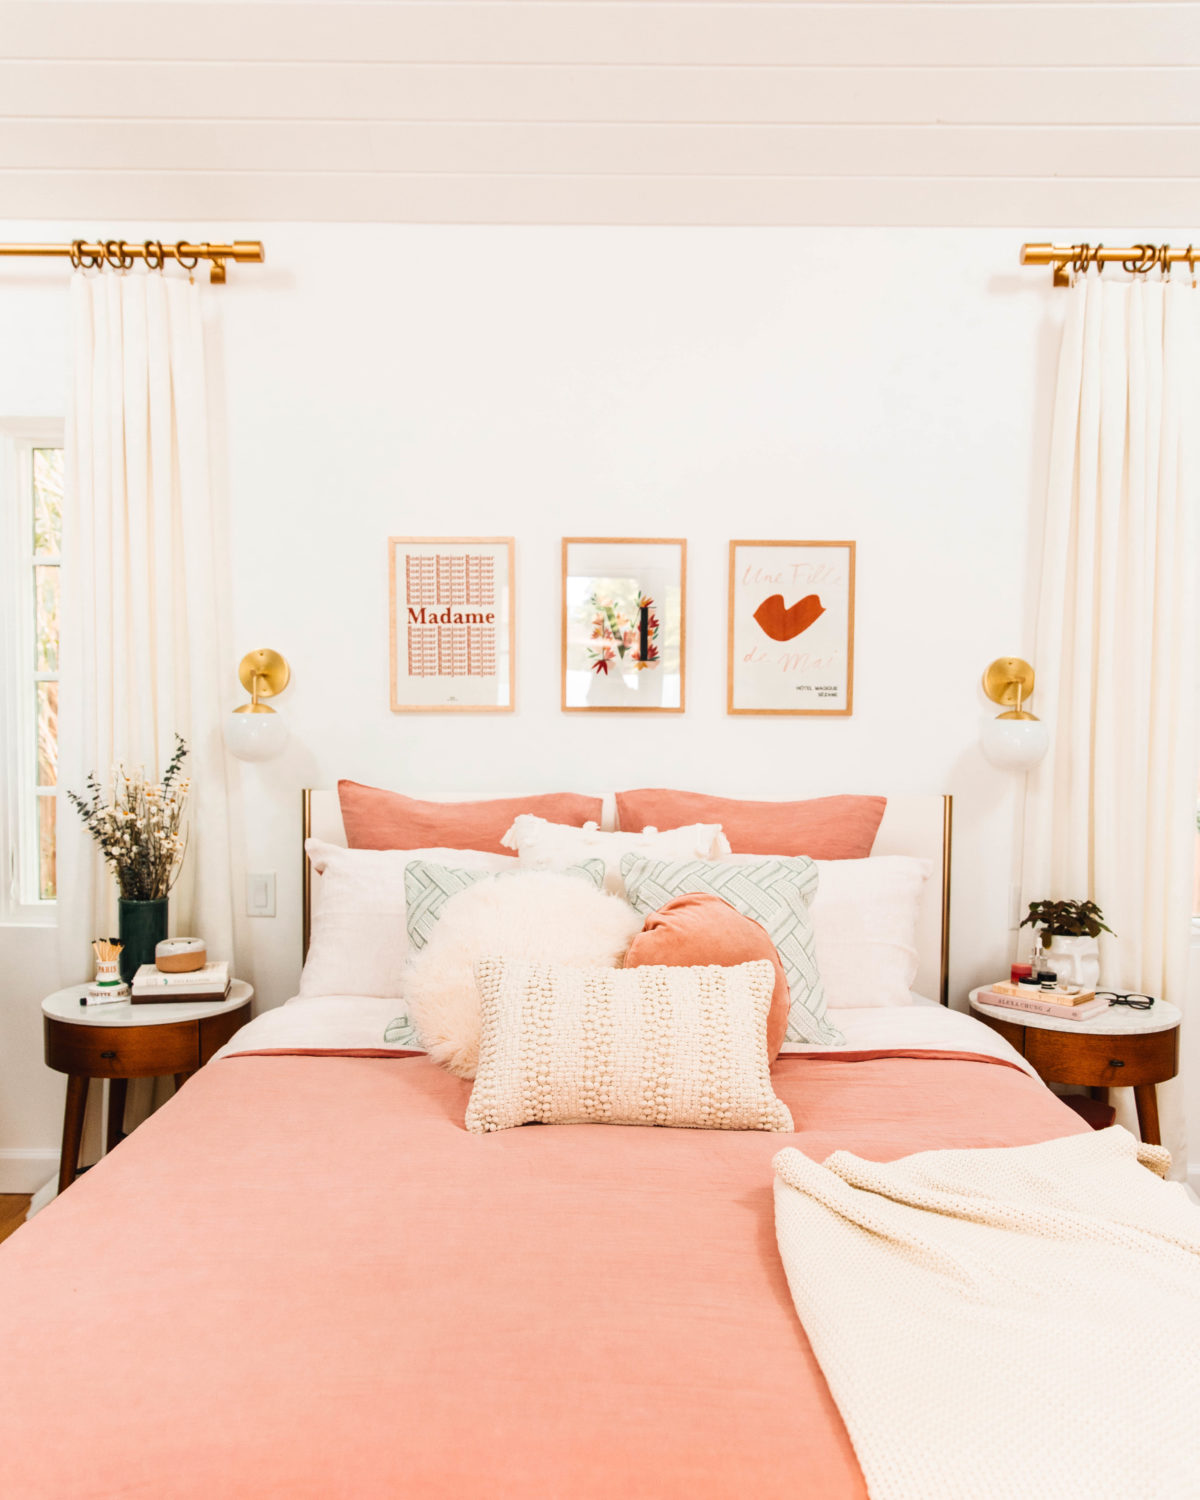 Our Blush Master Bedroom Reveal